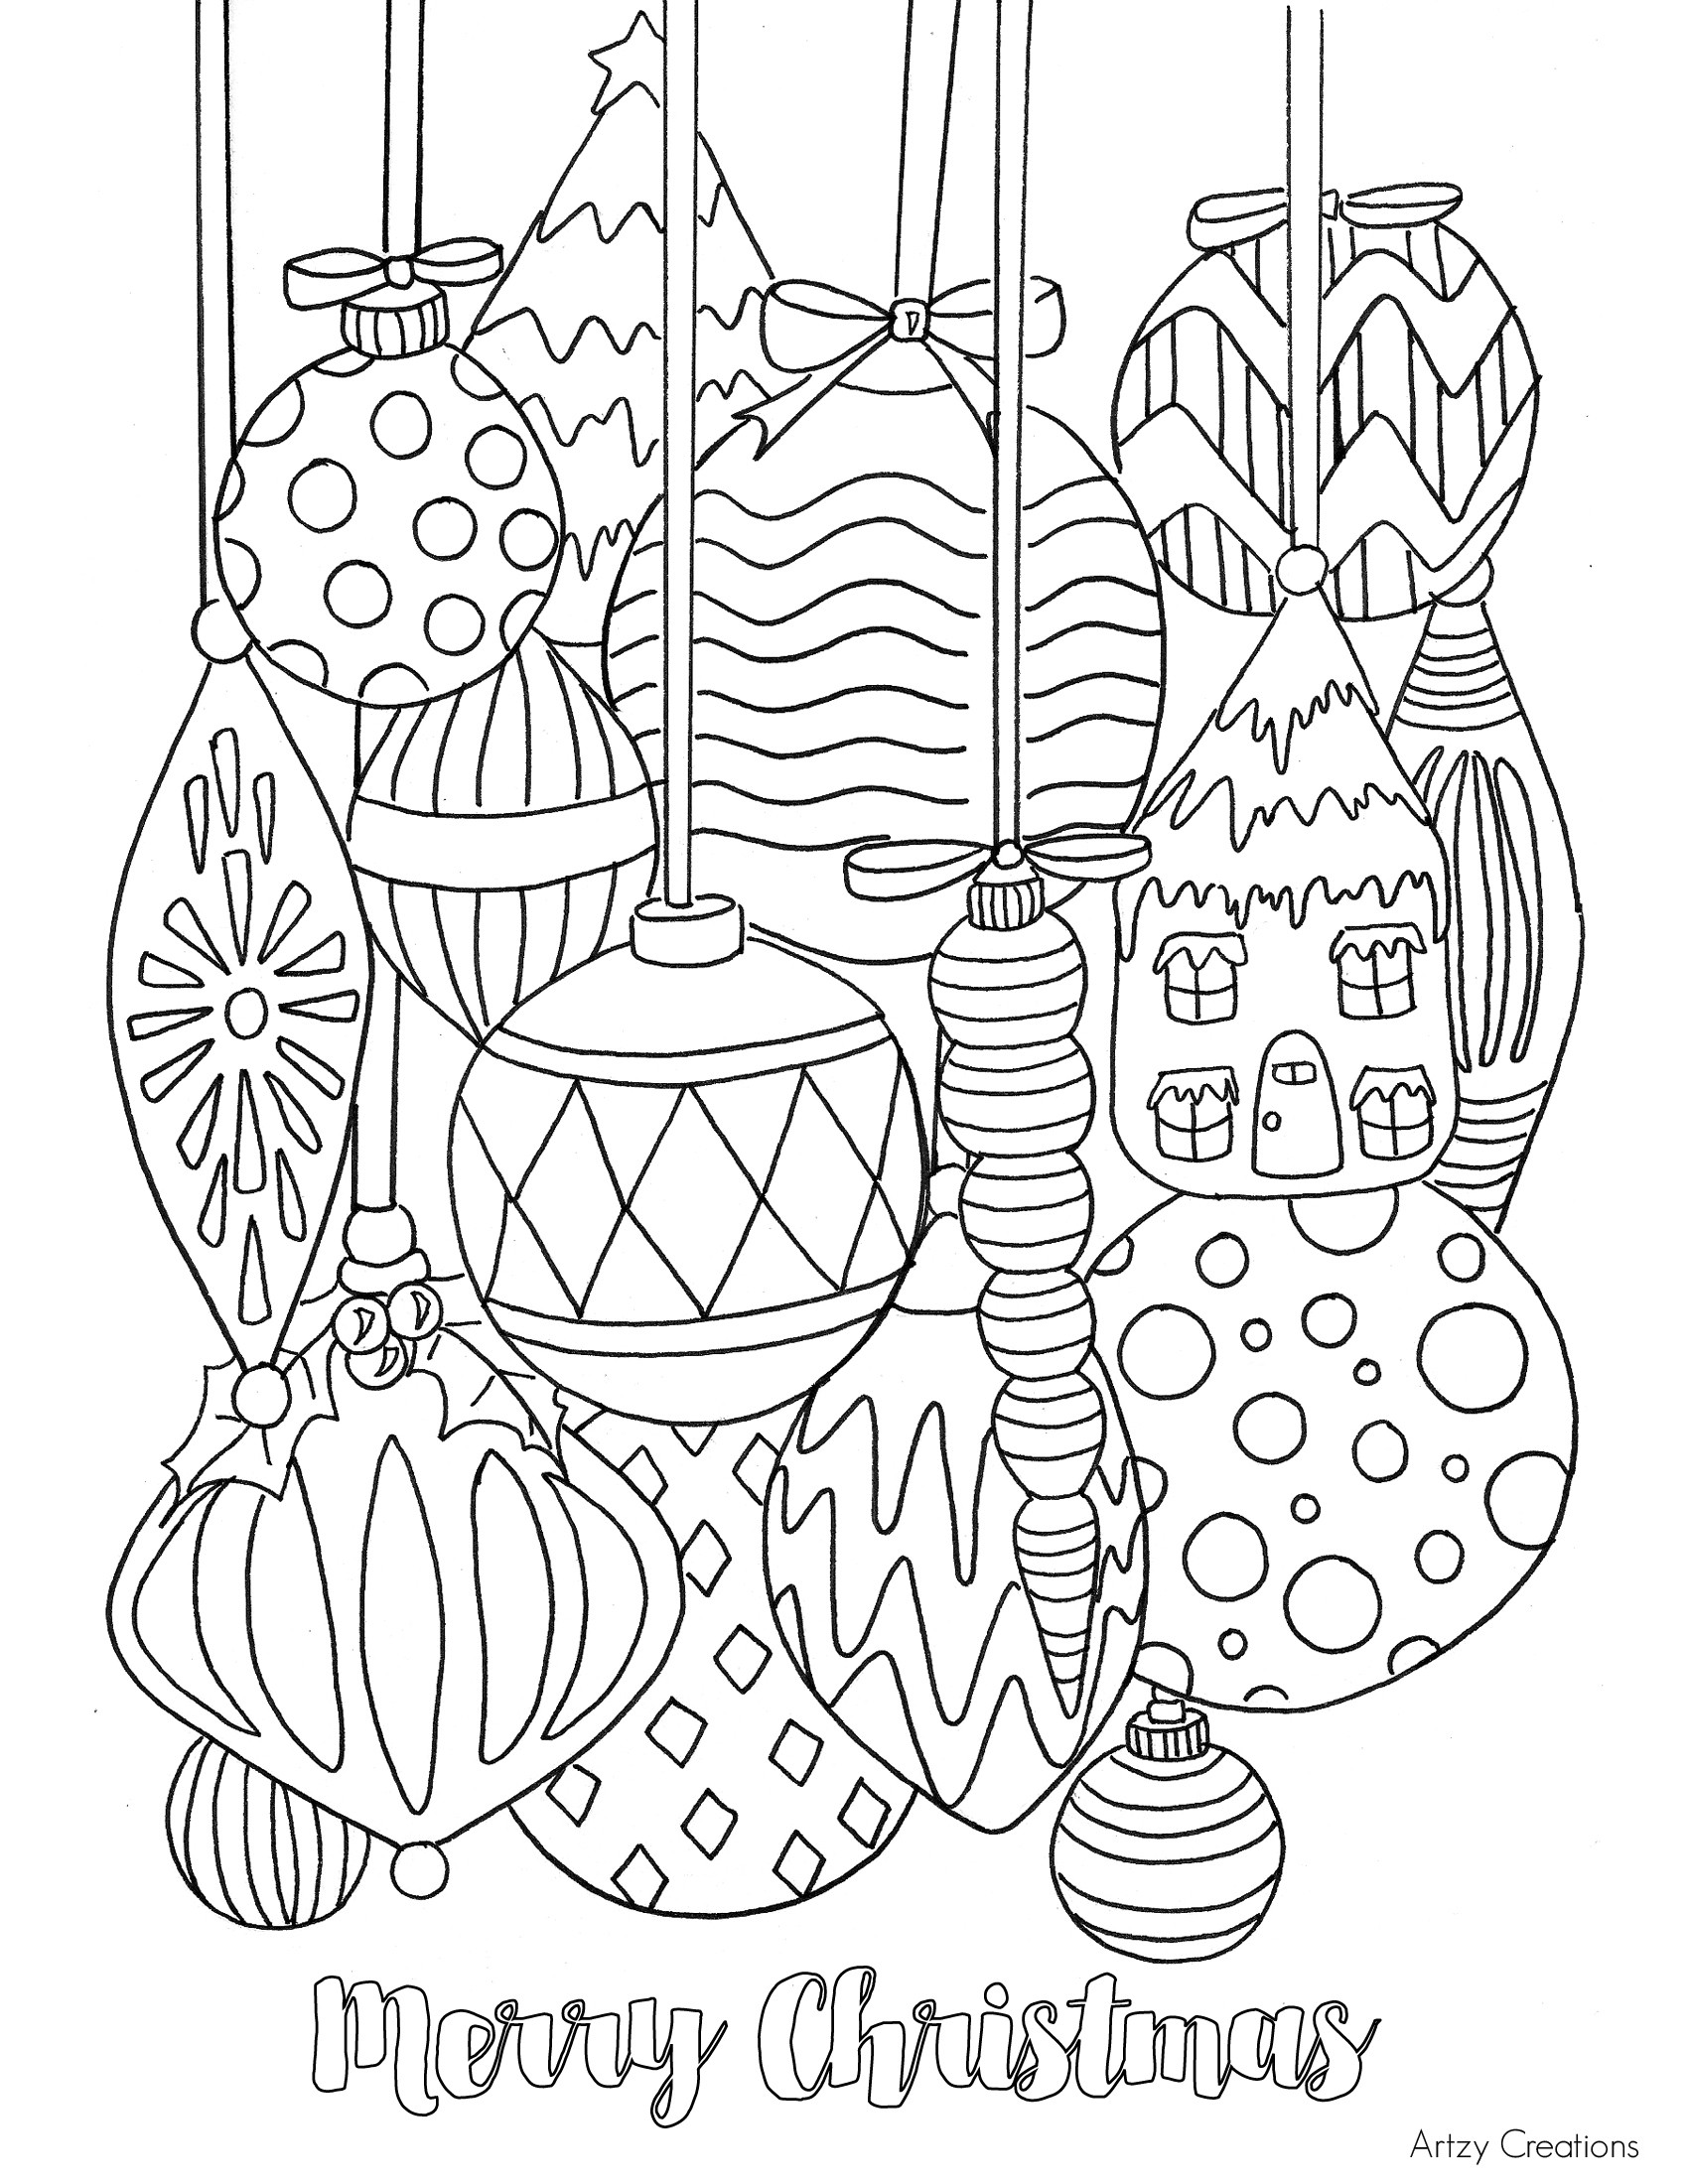 Christmas Ornaments Coloring Pages Printable
 Free Christmas Ornament Coloring Page TGIF This